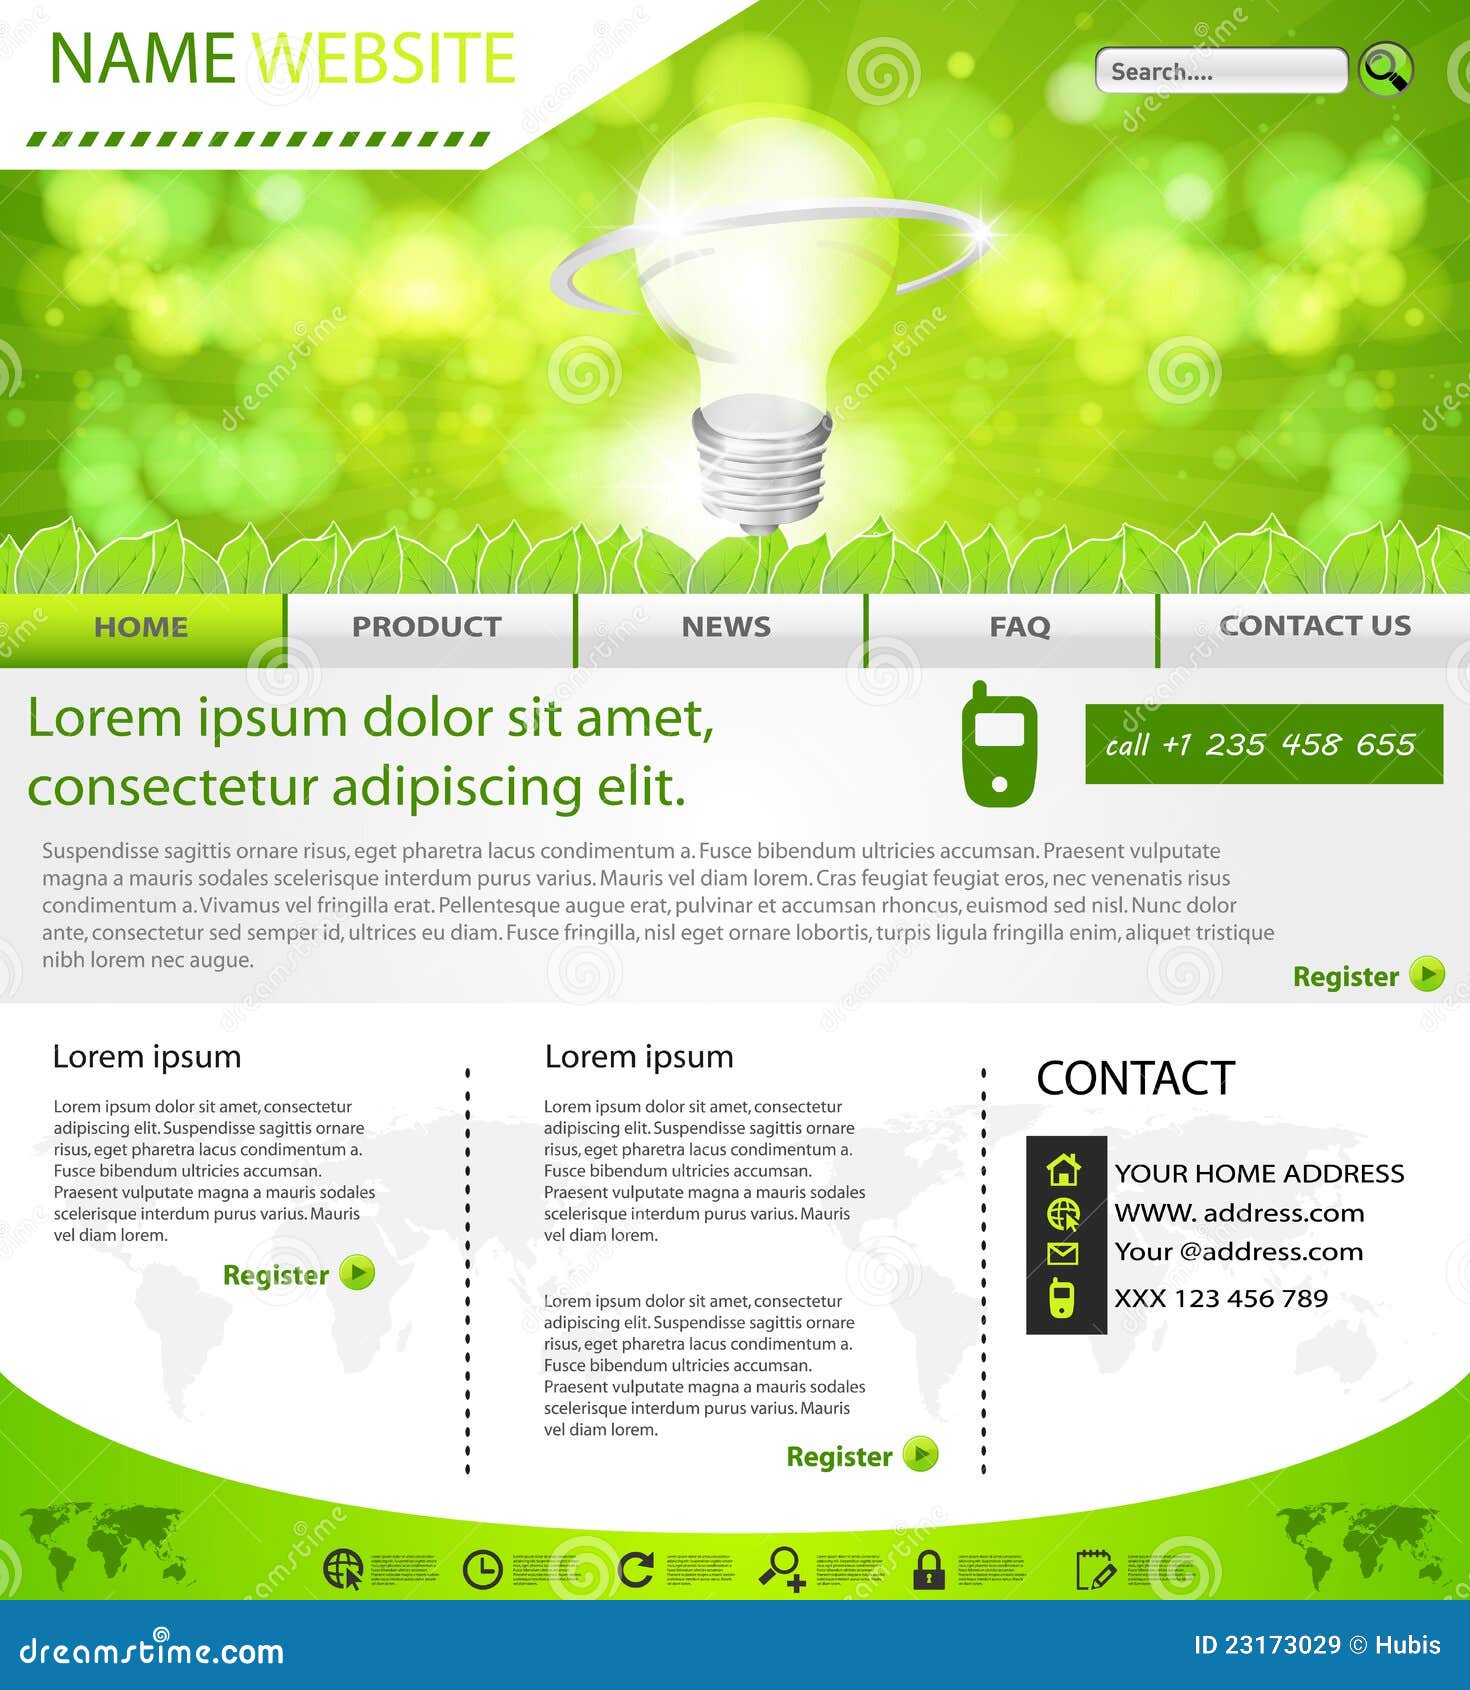 Website Eco Layout Template Royalty Free Stock Images - Image: 23173029